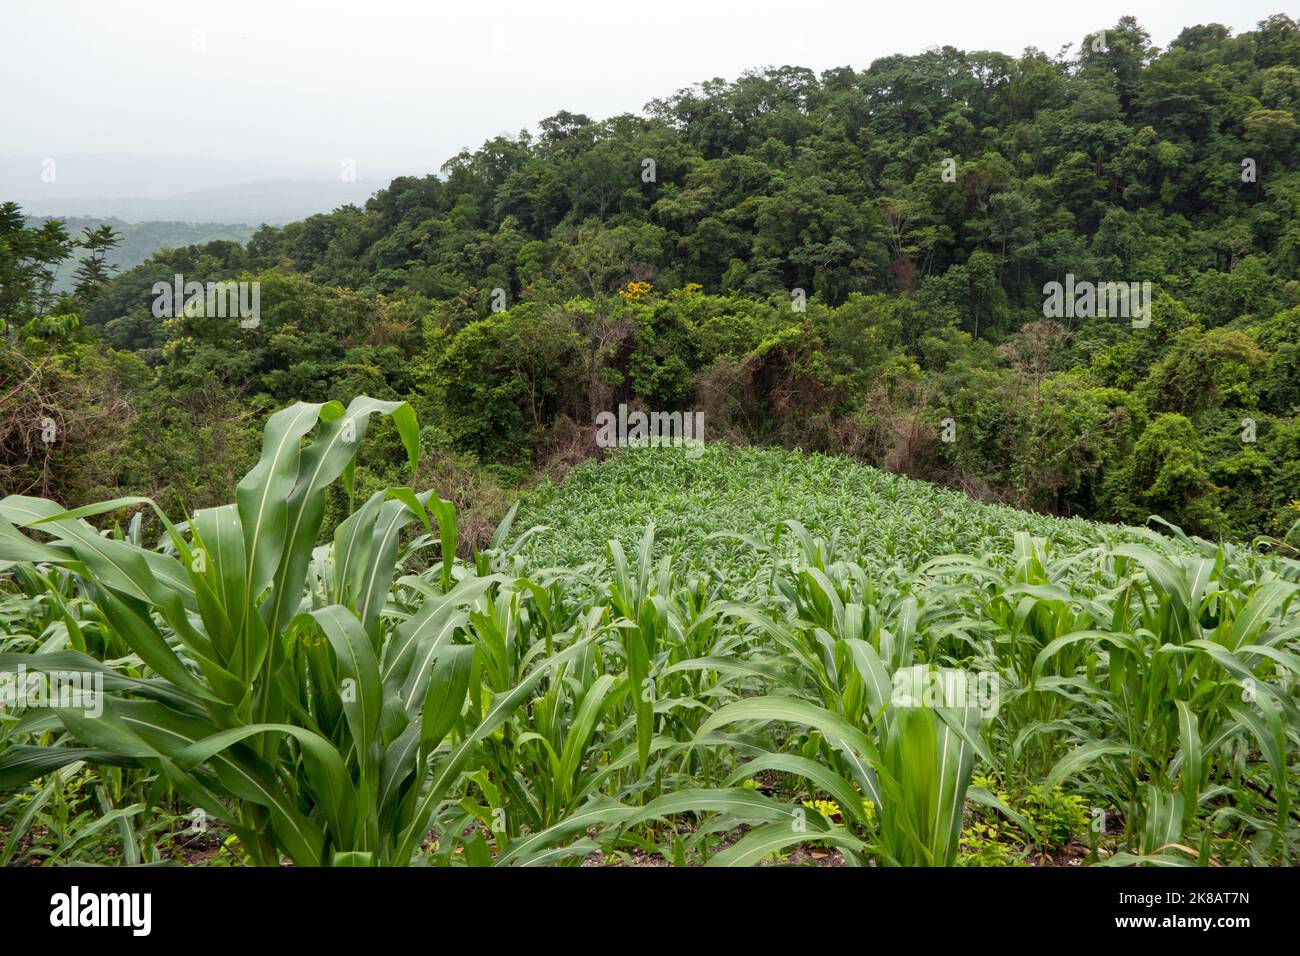 Jungle cleared for agriculture near Agua Azul waterfalls in Chiapas, Mexico. Corn field and rainforest. Habitat loss and environment degradation Stock Photo